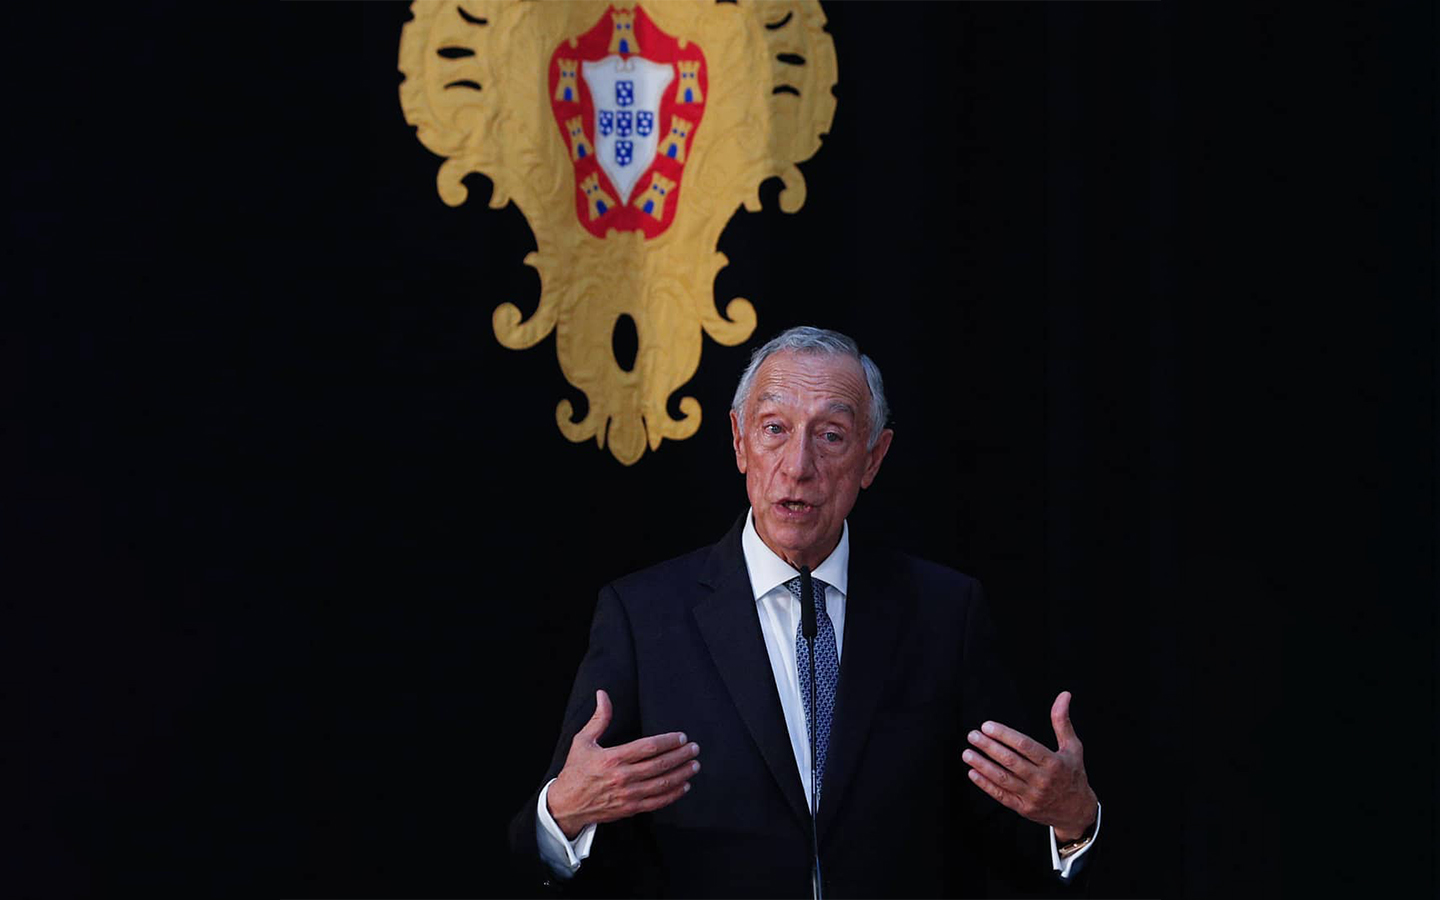 Portugal’s president dissolves parliament and calls snap elections